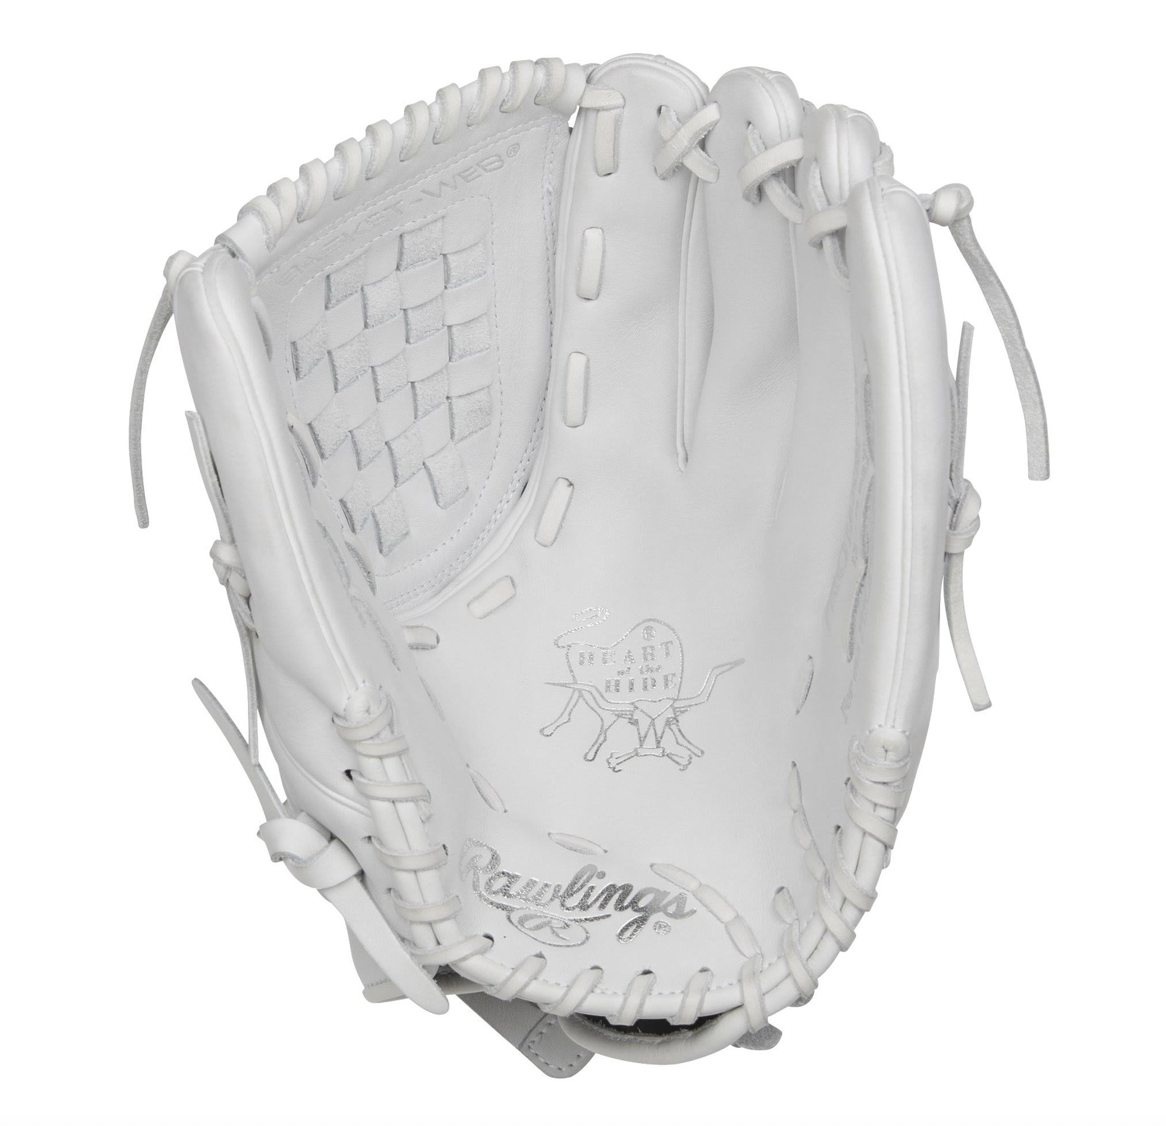 Rawlings Heart of the Hide Series Fastpitch Softball Glove